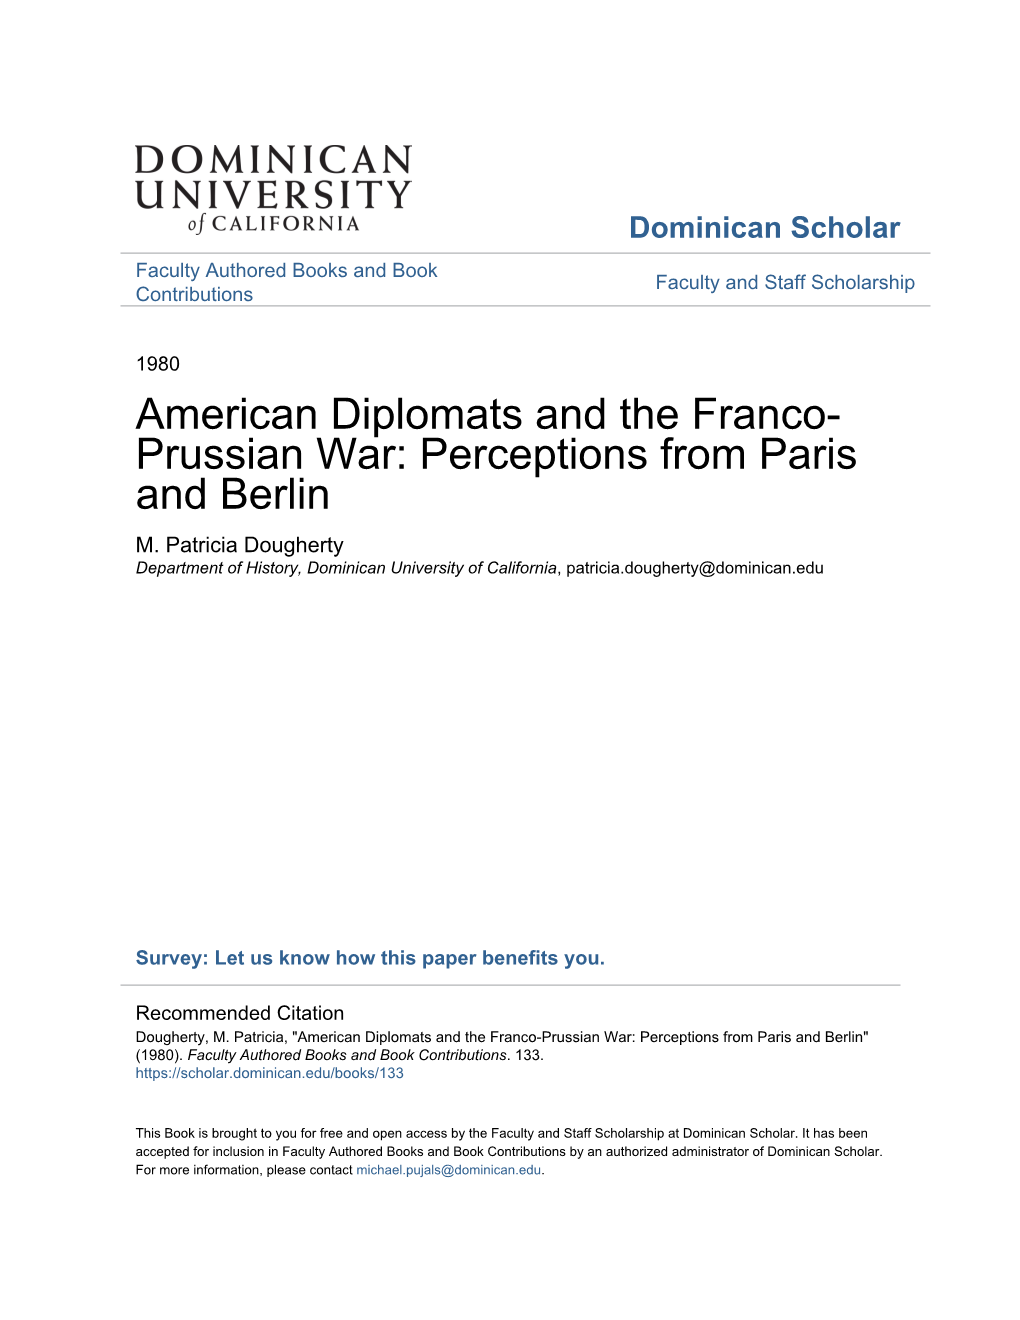 American Diplomats and the Franco-Prussian War: Perceptions from Paris and Berlin" (1980)